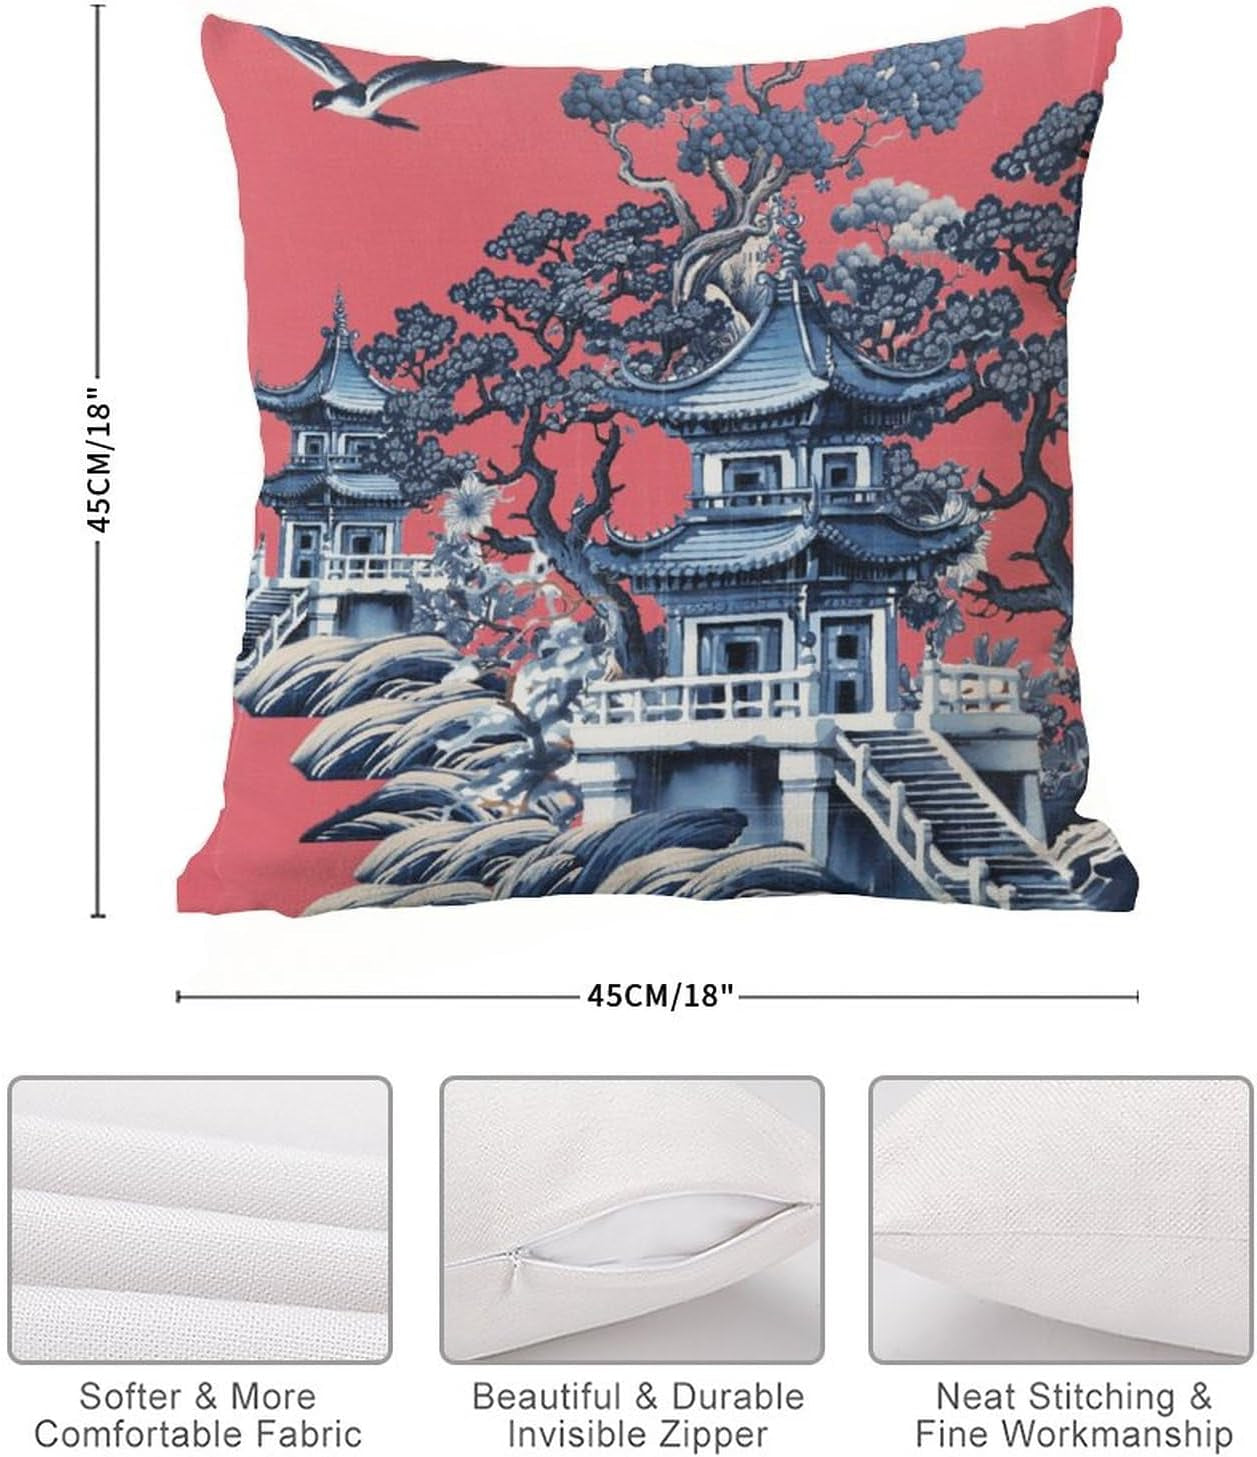 Decorative Pillow Cover Pink Blue Chinoiserie Pillow Square Made to Order Pillow Cover 18X18 Throw Pillow Toss Pillow Pagoda Cushion Cover